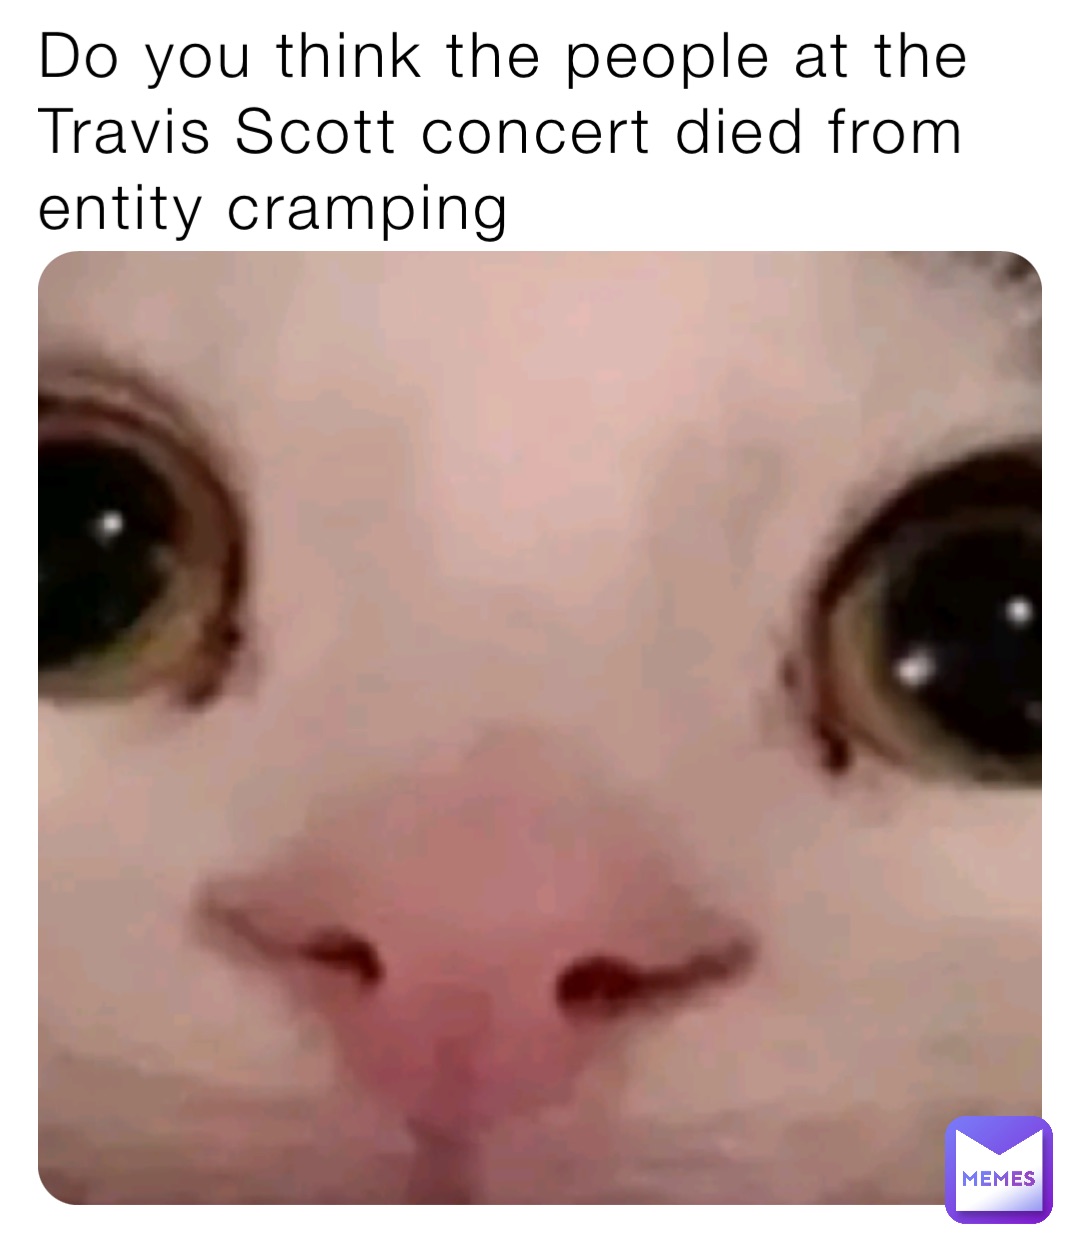 Do you think the people at the Travis Scott concert died from entity cramping